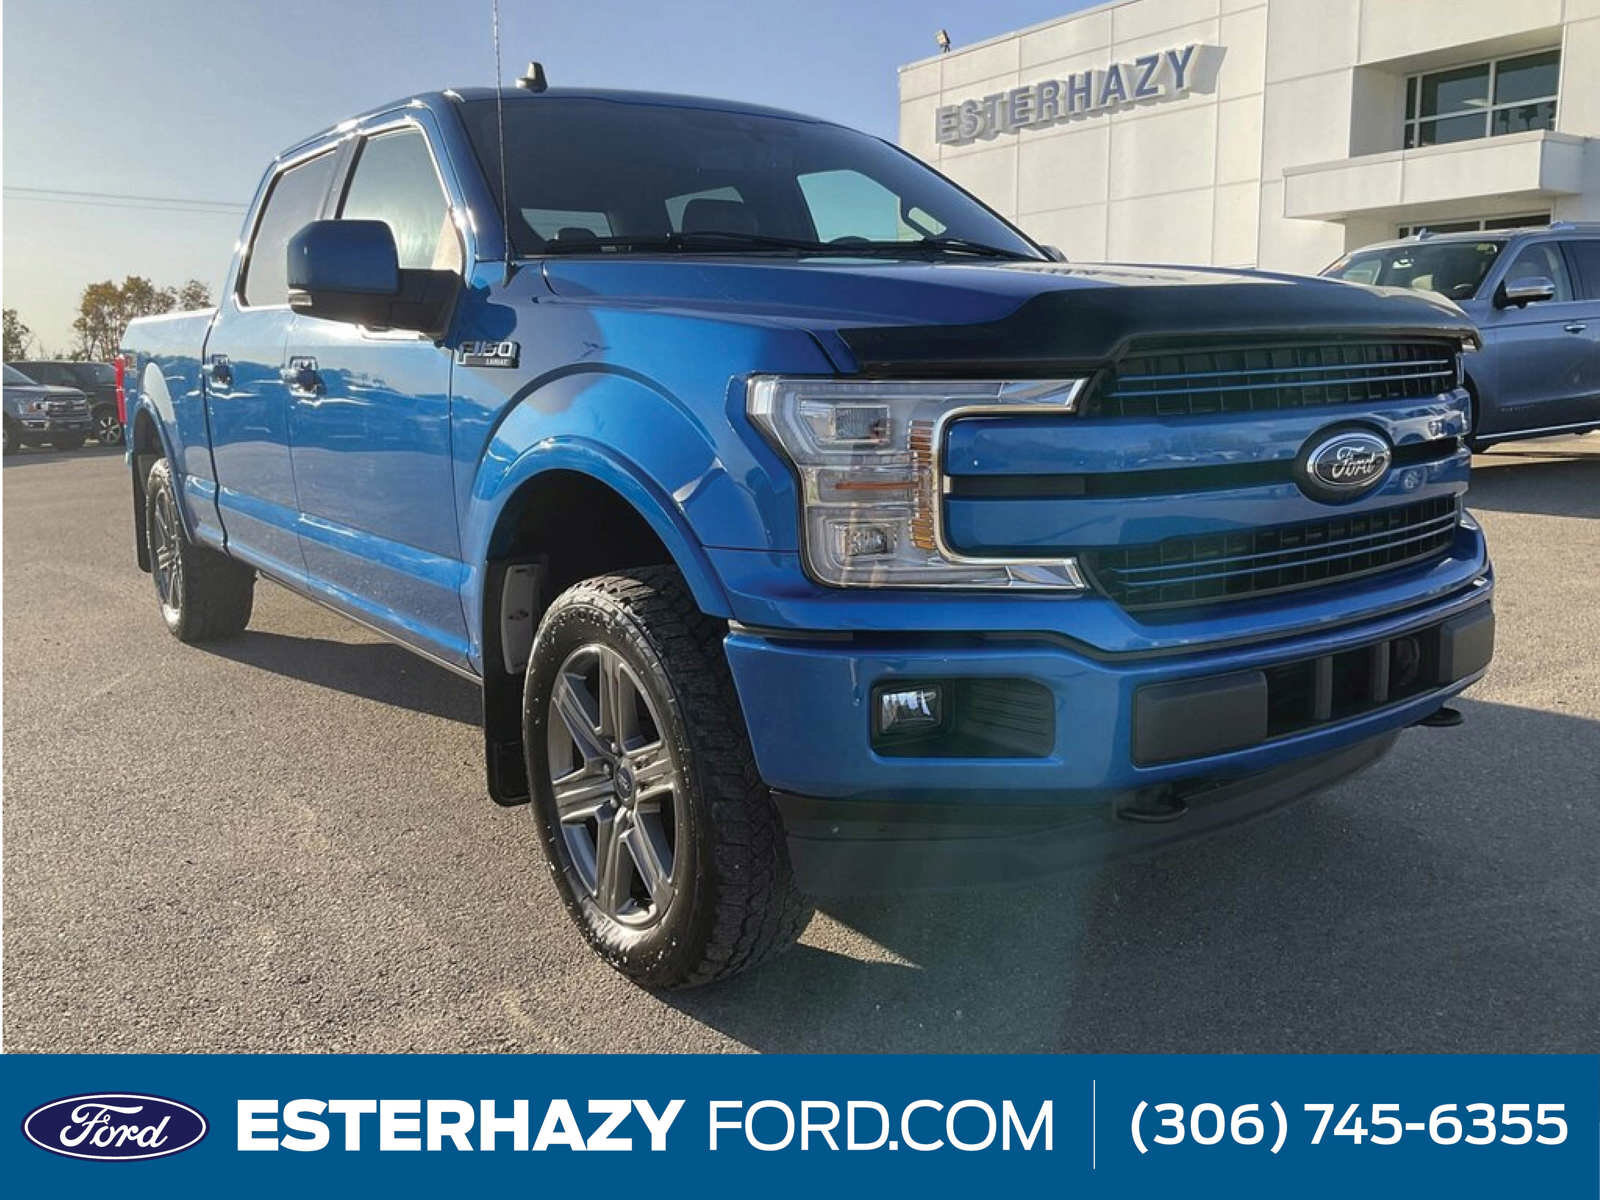 2020 Ford F-150 LARIAT | NAVIGATION | ACTIVE PARK ASSIST | HEATED 